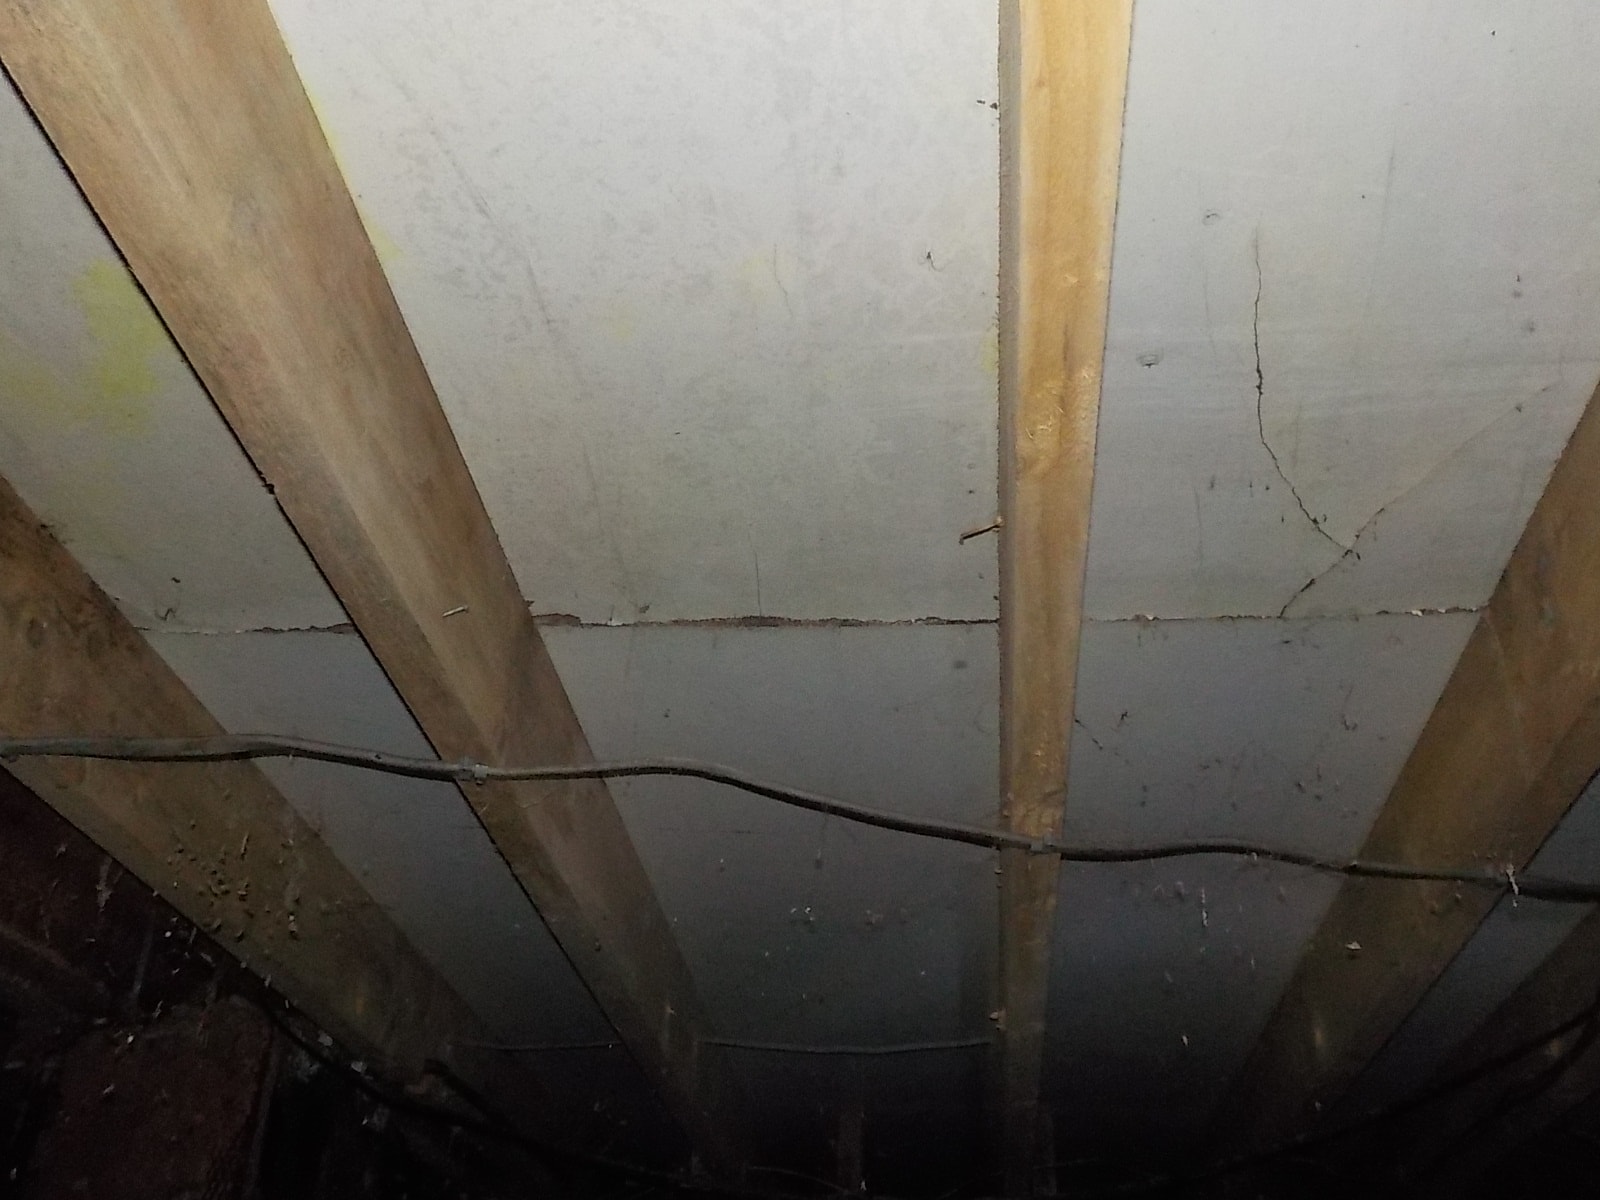 Over spanned and too widley spaced joists